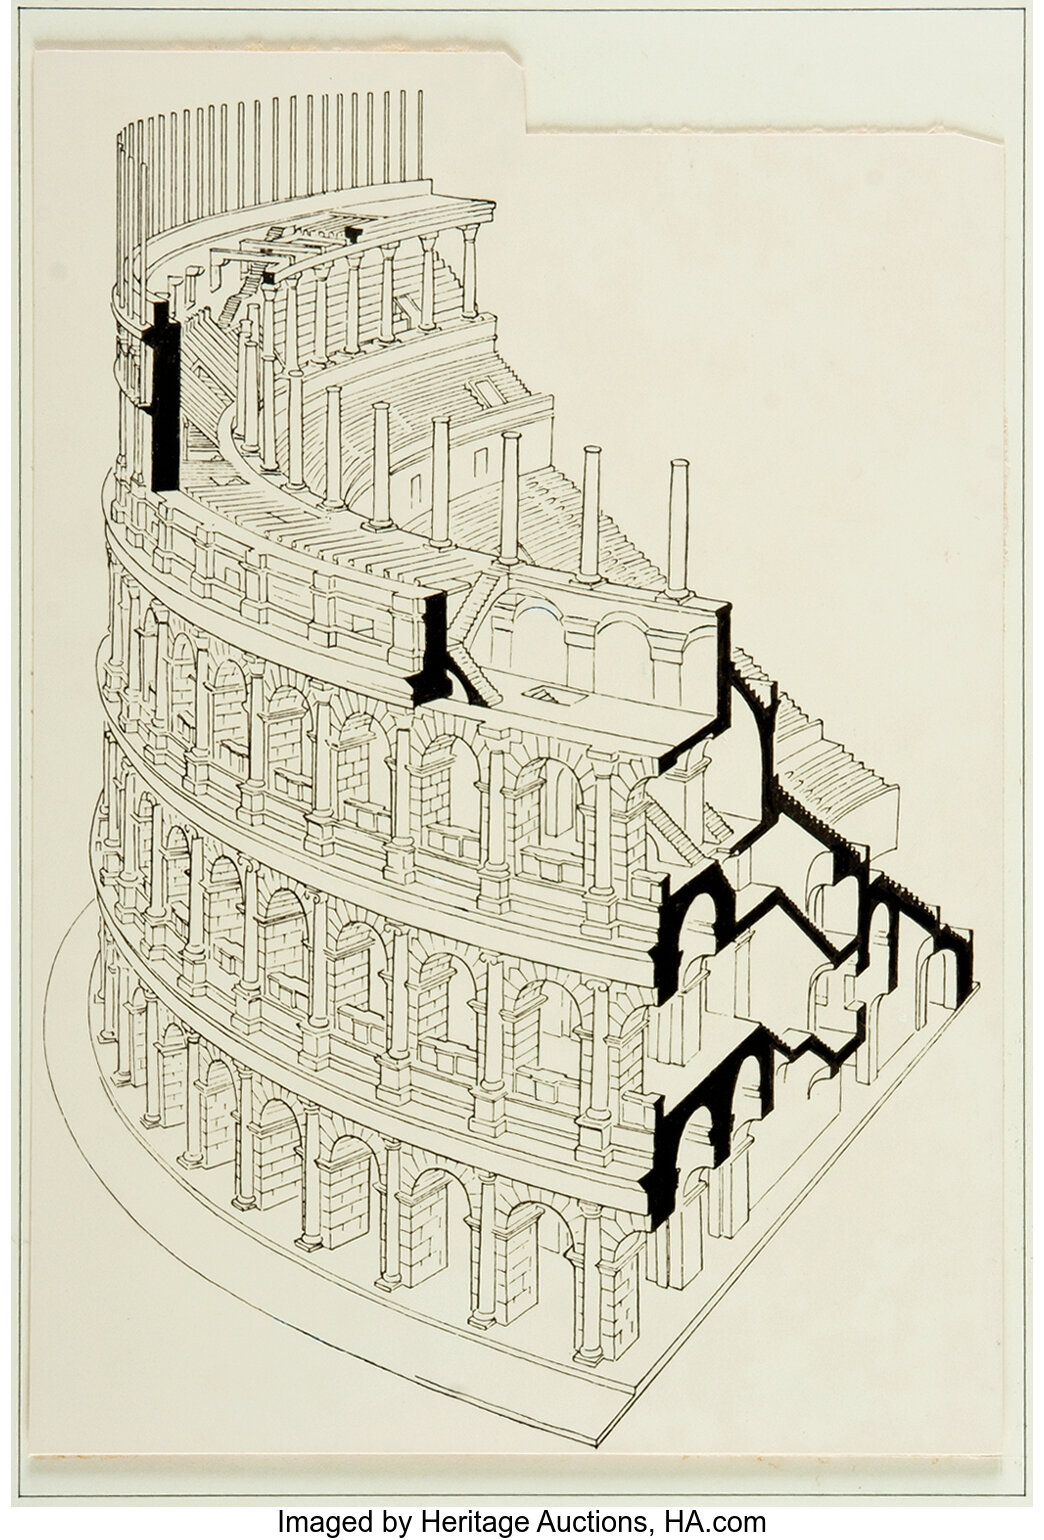 Saks-Fifth Avenue store, a drawing — Calisphere